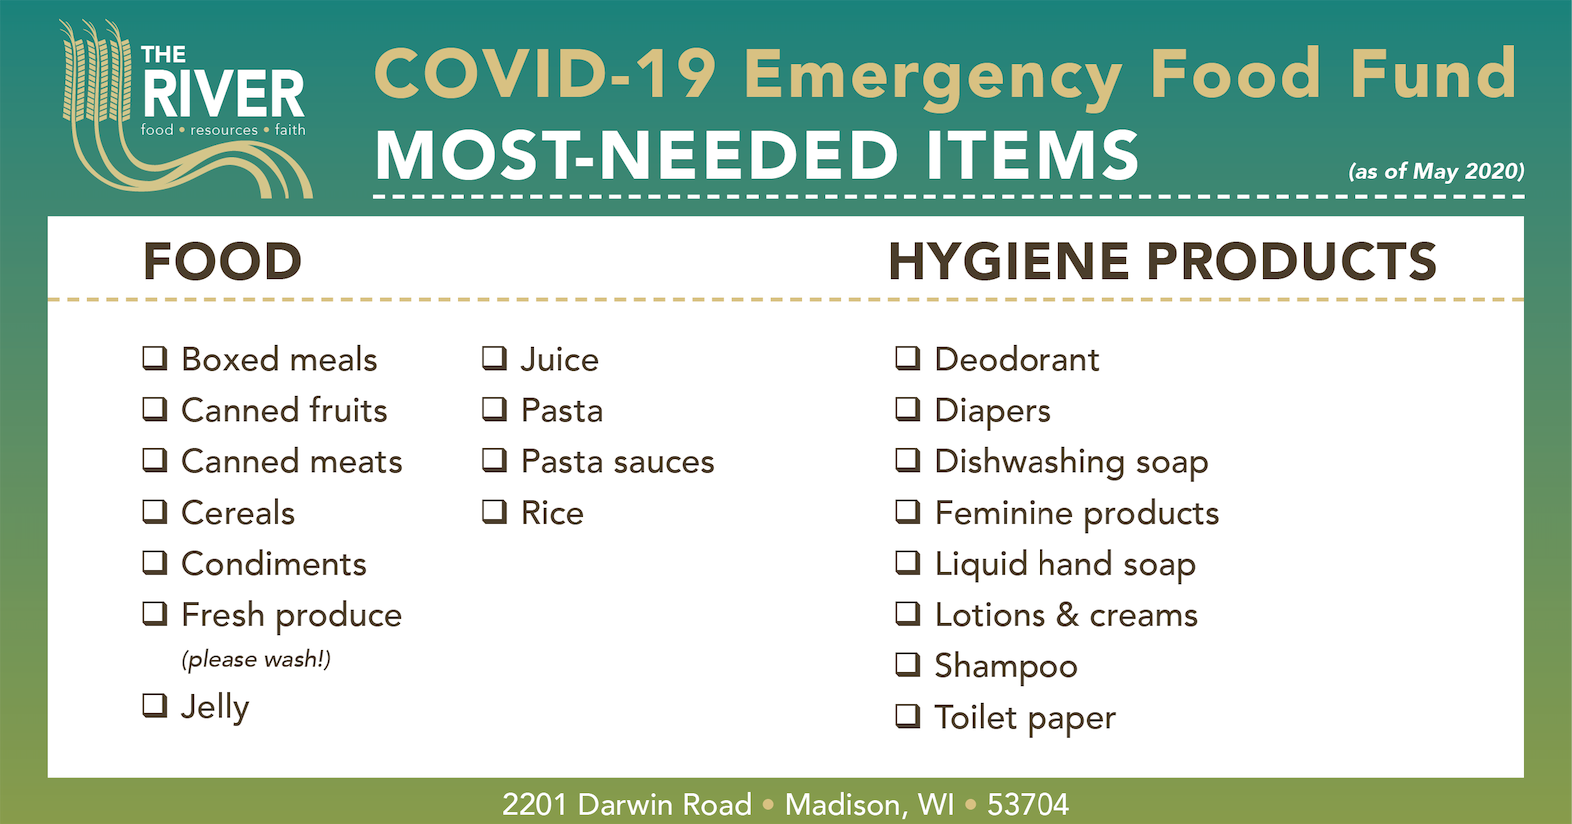 https://www.riverfoodpantry.org/wp-content/uploads/2020/05/COVID-19-most-needed-items-web.png